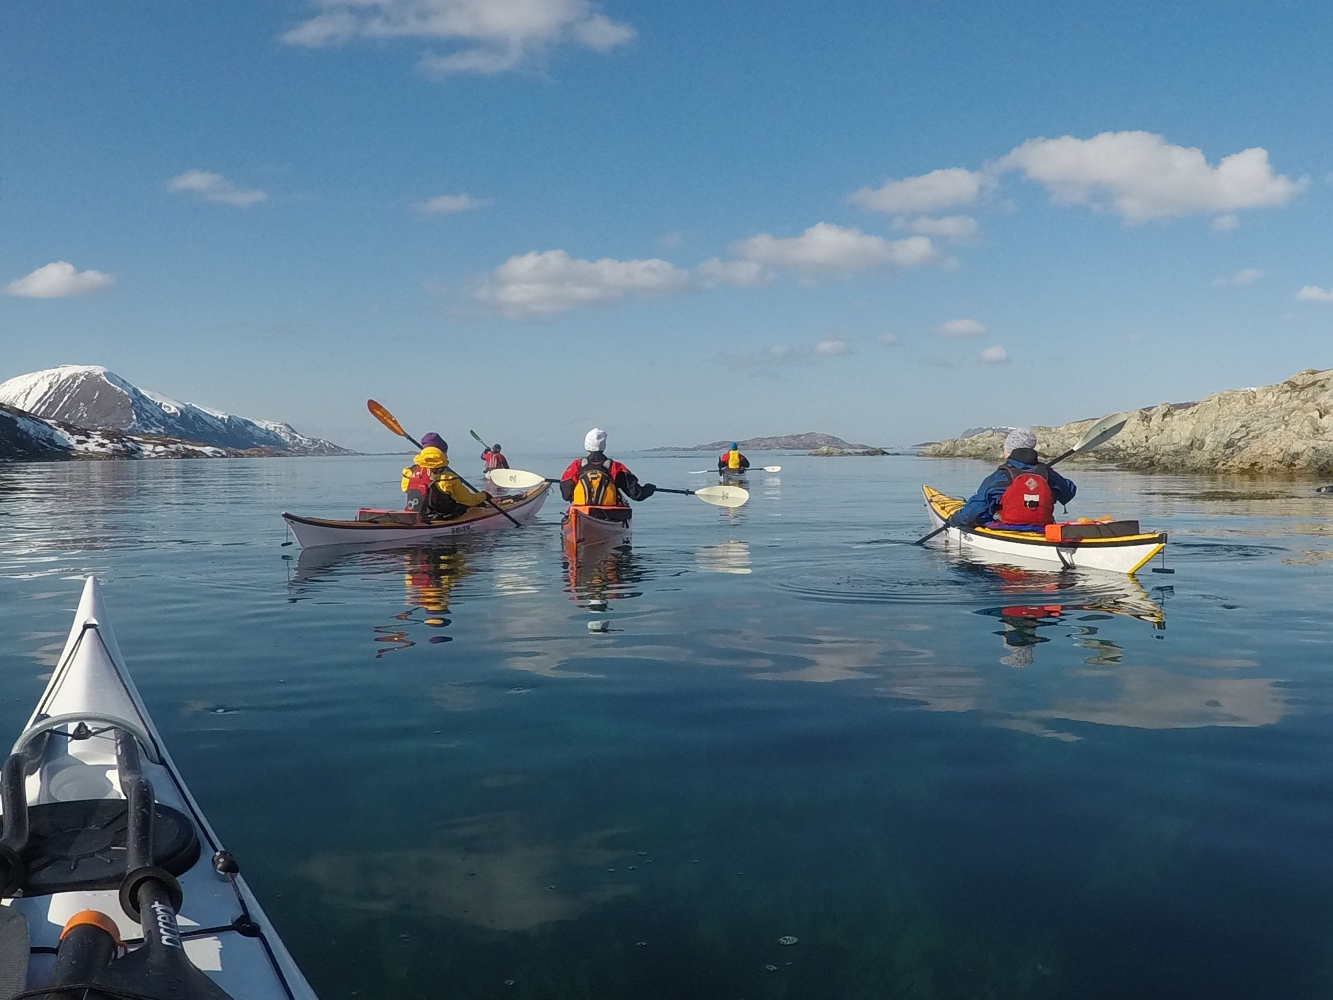 Two days Arctic Camp with kayaking